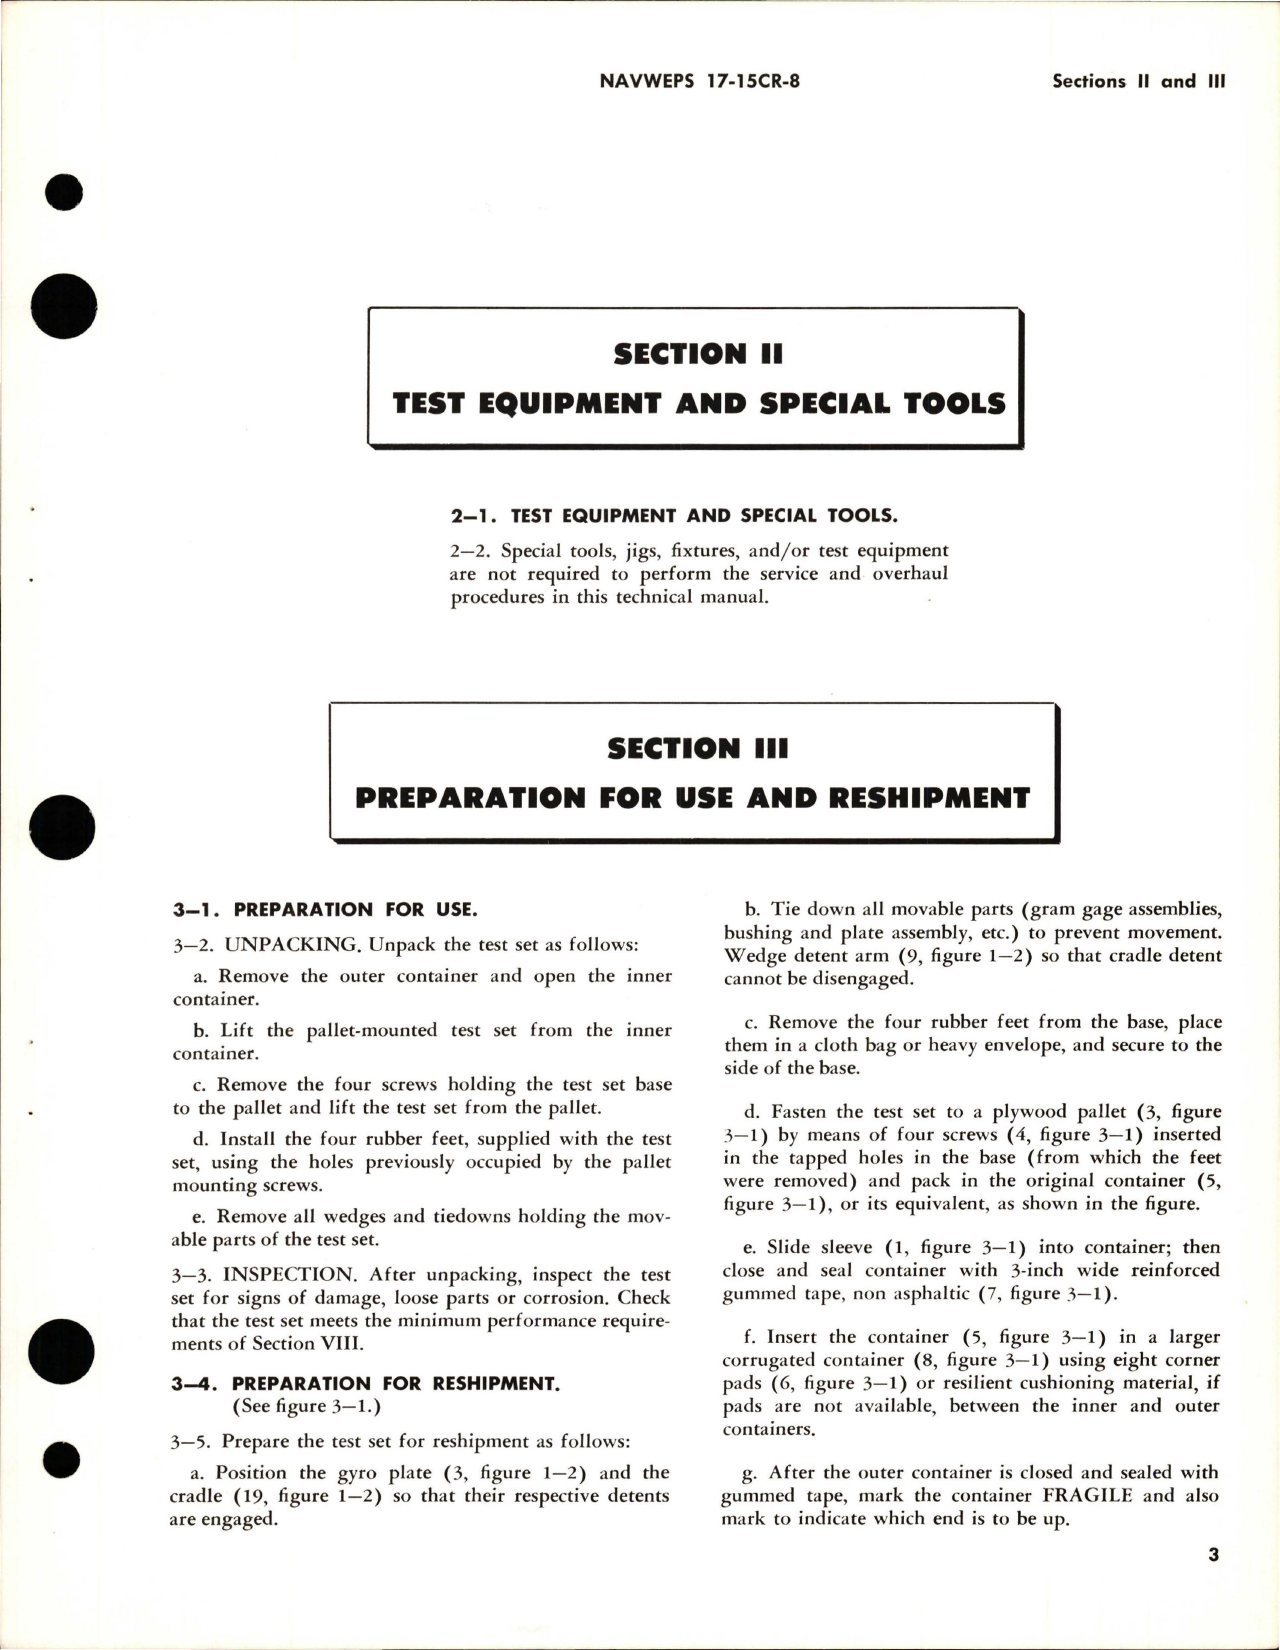 Sample page 7 from AirCorps Library document: Operation, Service Instructions and Illustrated Parts Breakdown for Brush Tension Test Set - Part KT431381-1A (Kearfott